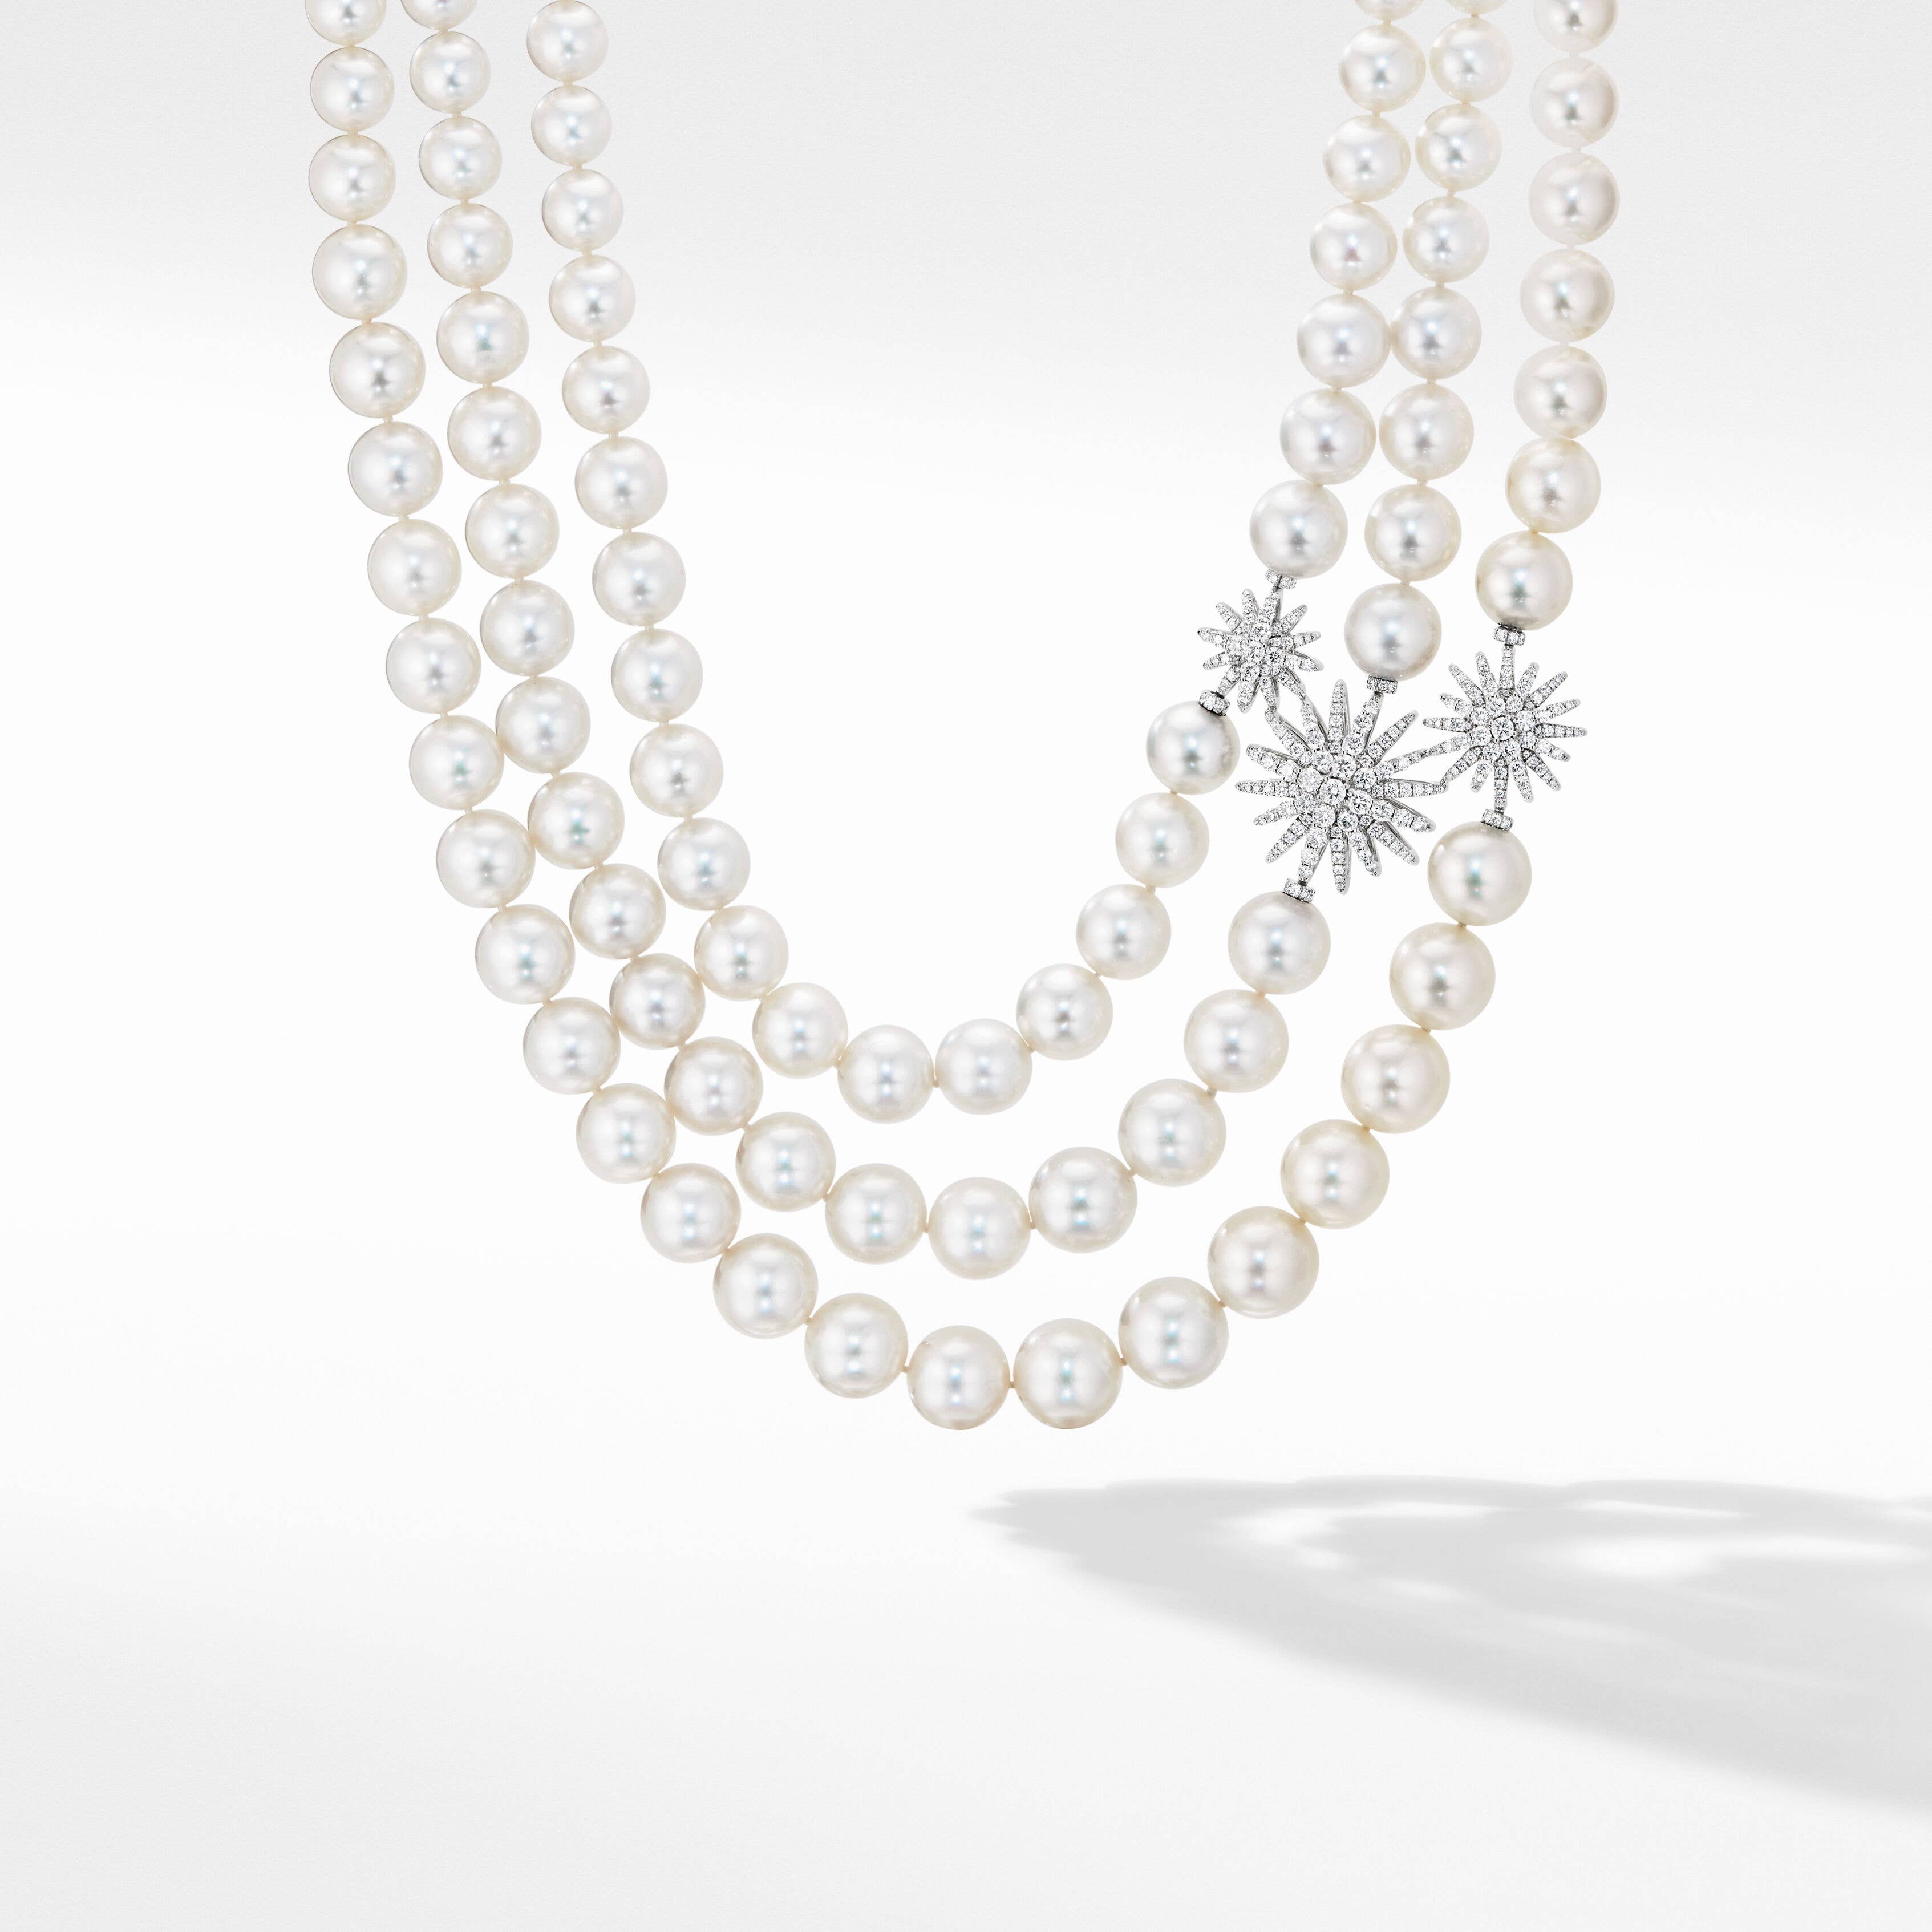 Starburst Pearl Necklace in White Gold with Diamonds